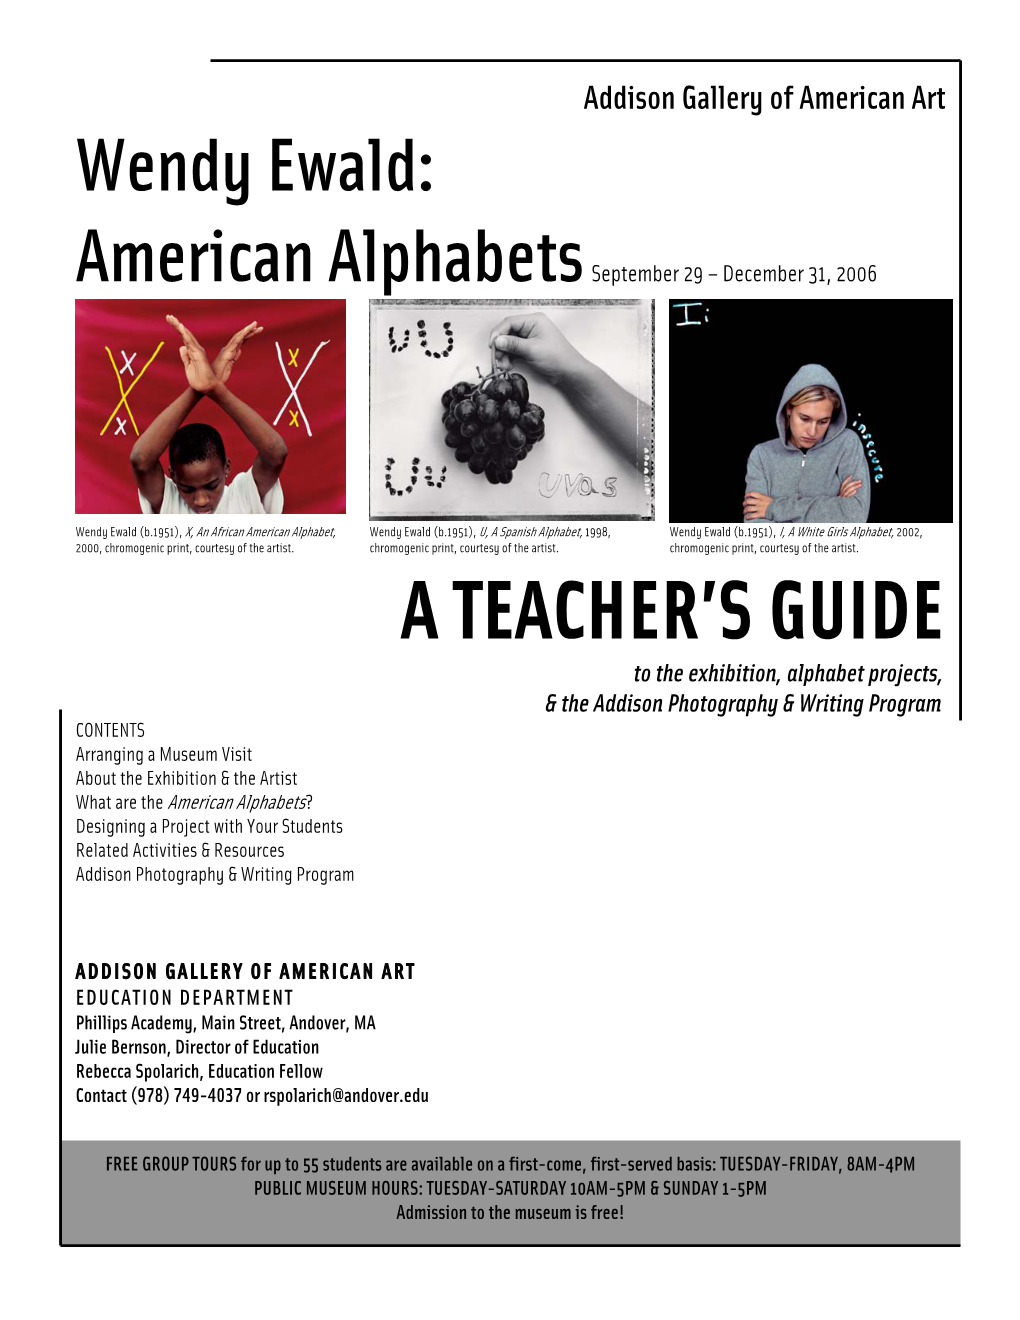 Wendy Ewald: American Alphabets Teachers Guide, Fall 2006, Addison Gallery of American Art, Page 1